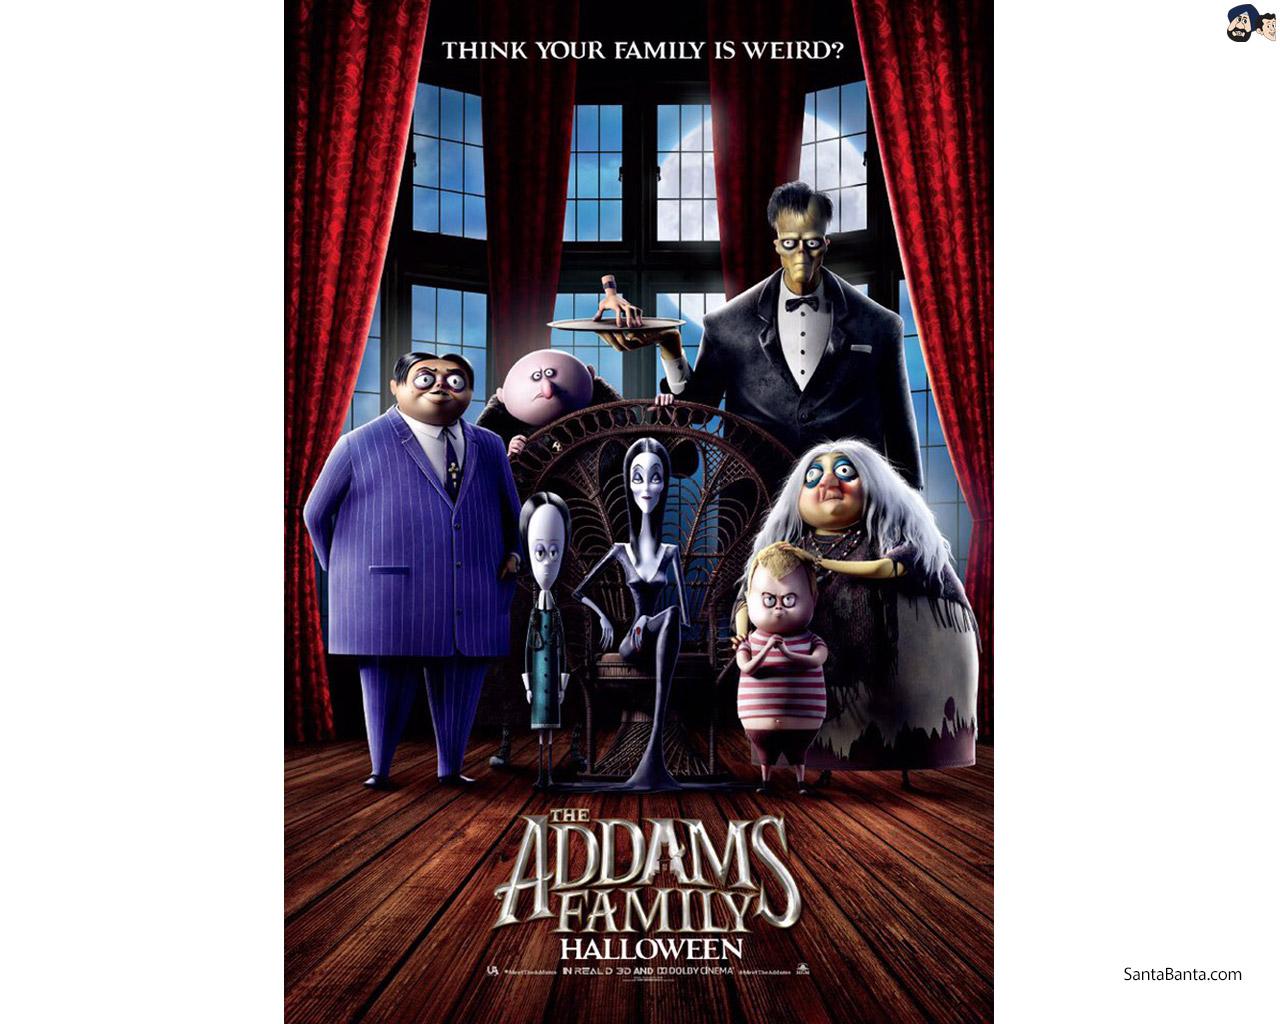 Charles Addams` animated film, The Addams Family October 11